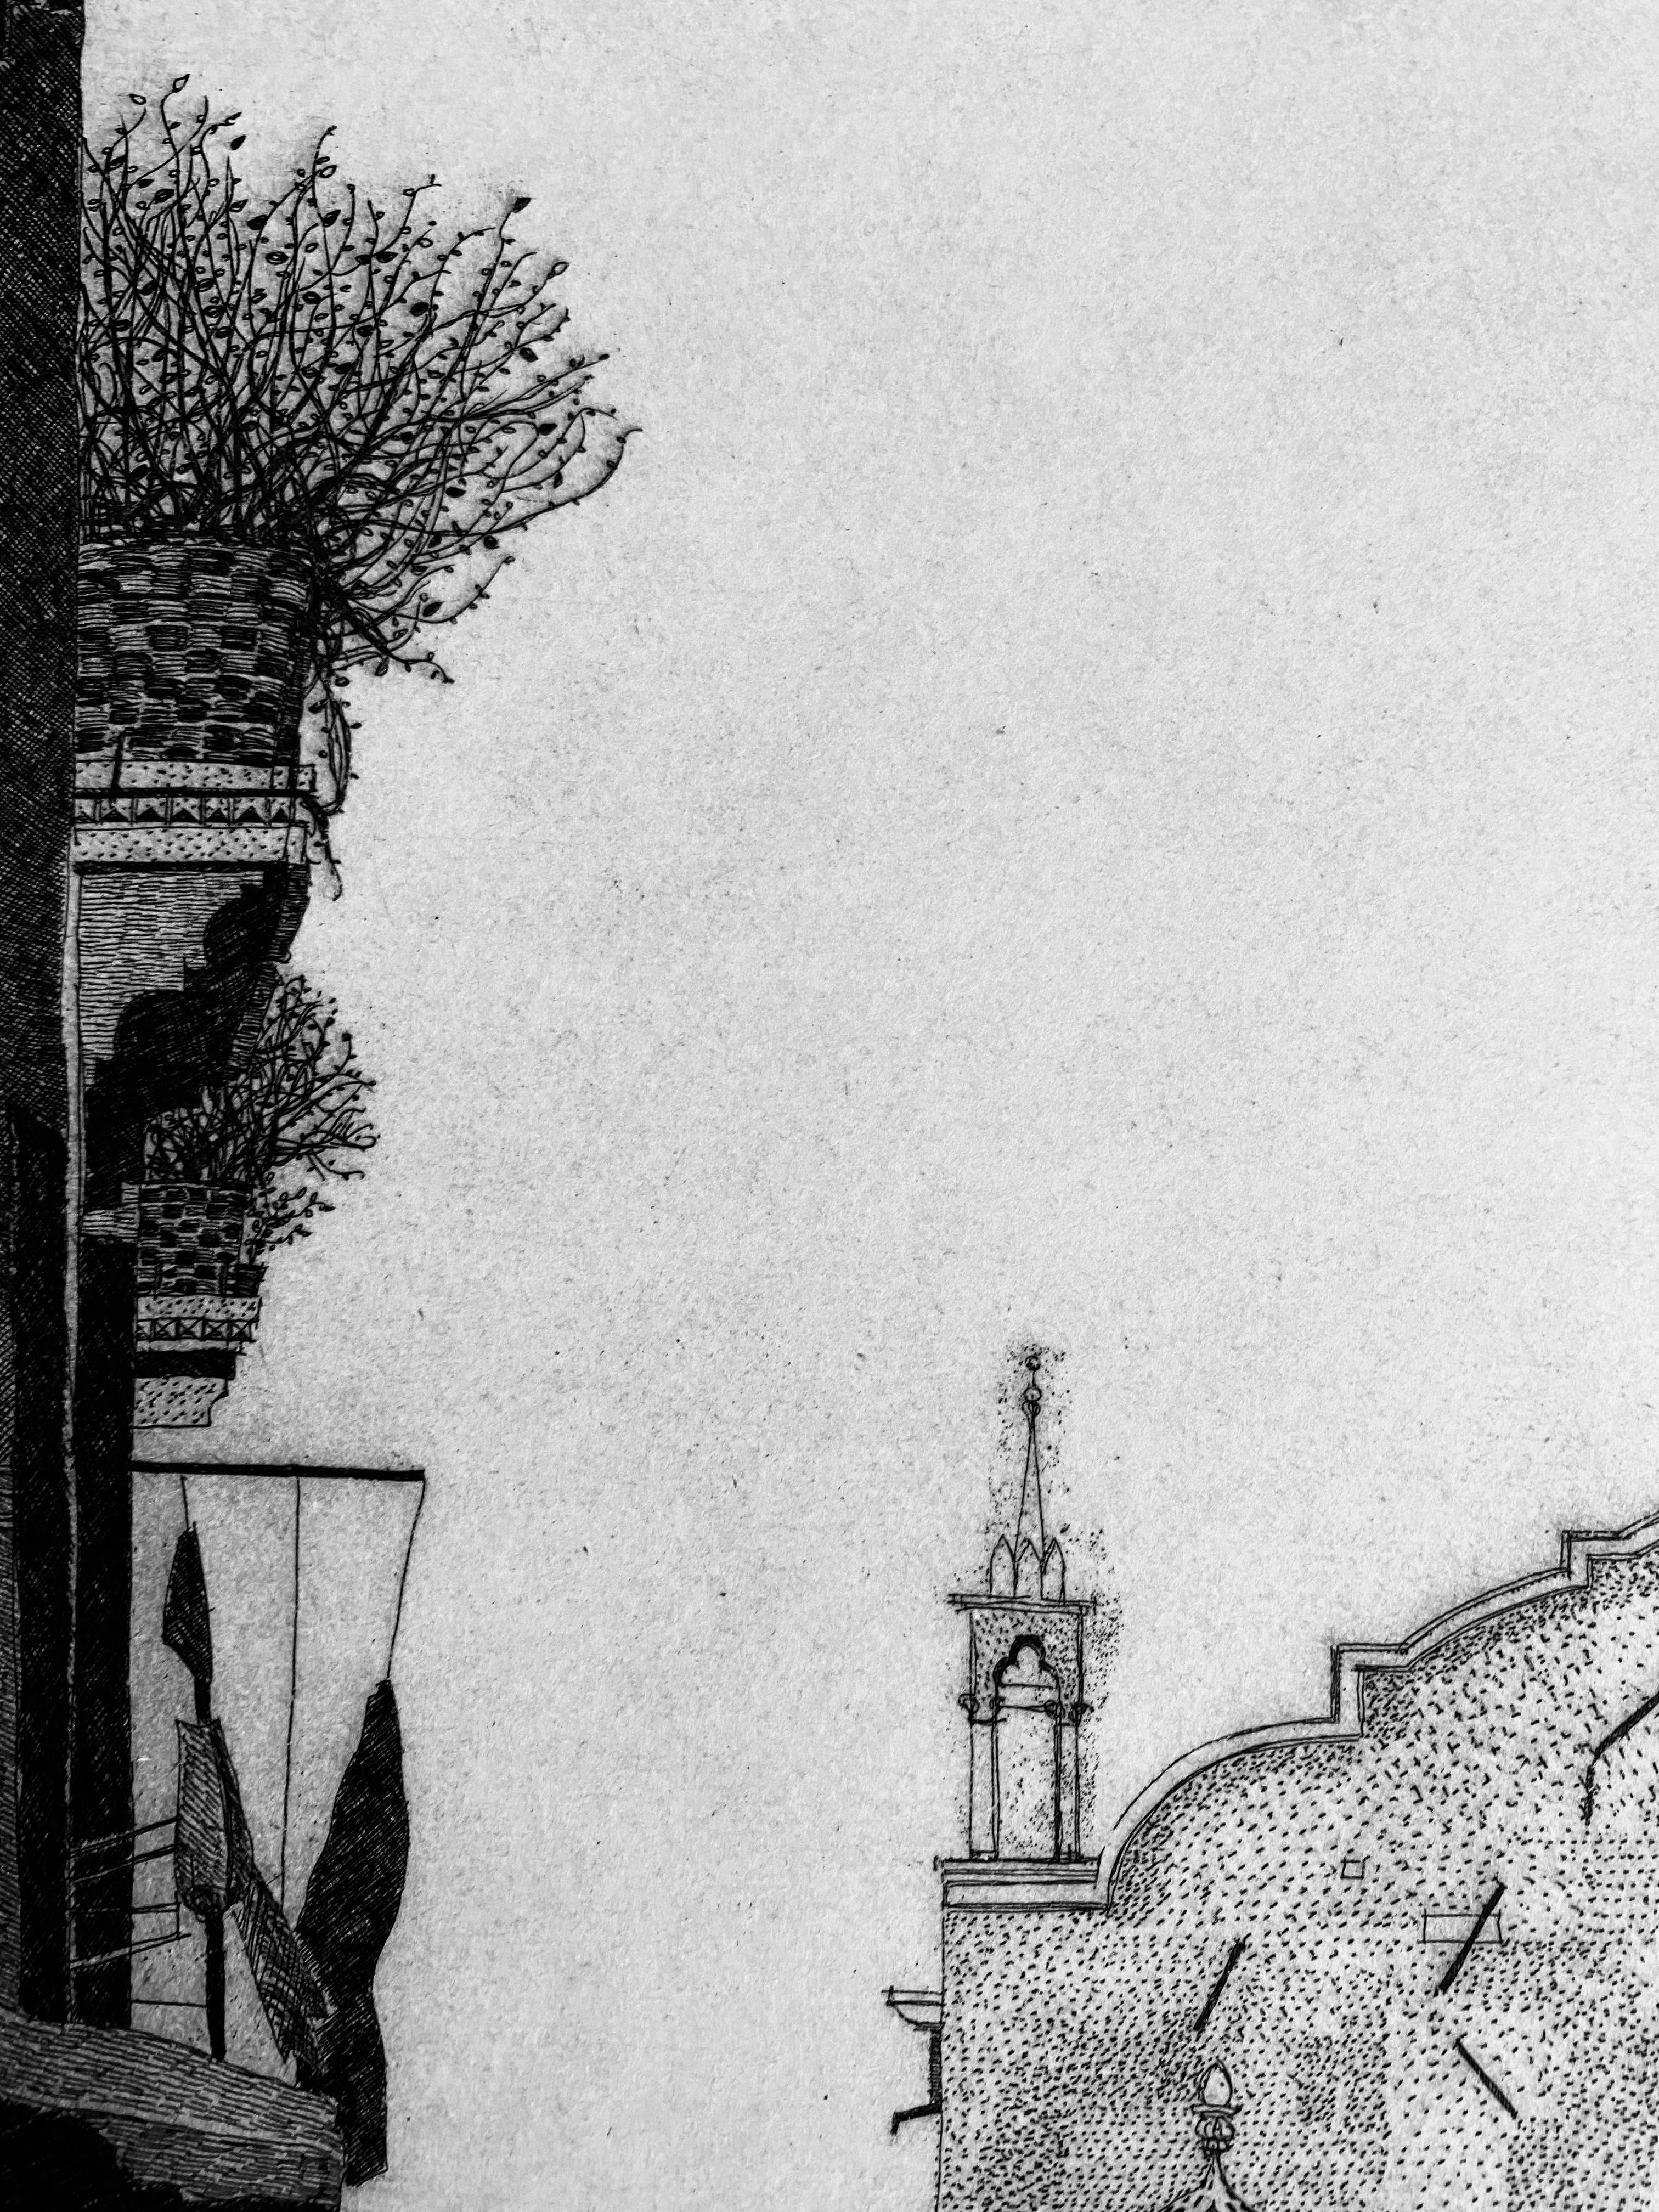 Venezia, Campo de l' Abazia, 1984
plate mm 491 x 243 
Original etching, signed and numbered. Limited edition of 90.

The etching was exhibited last year in the critical retrospective that the city of Milan promoted and set up to mark the tenth